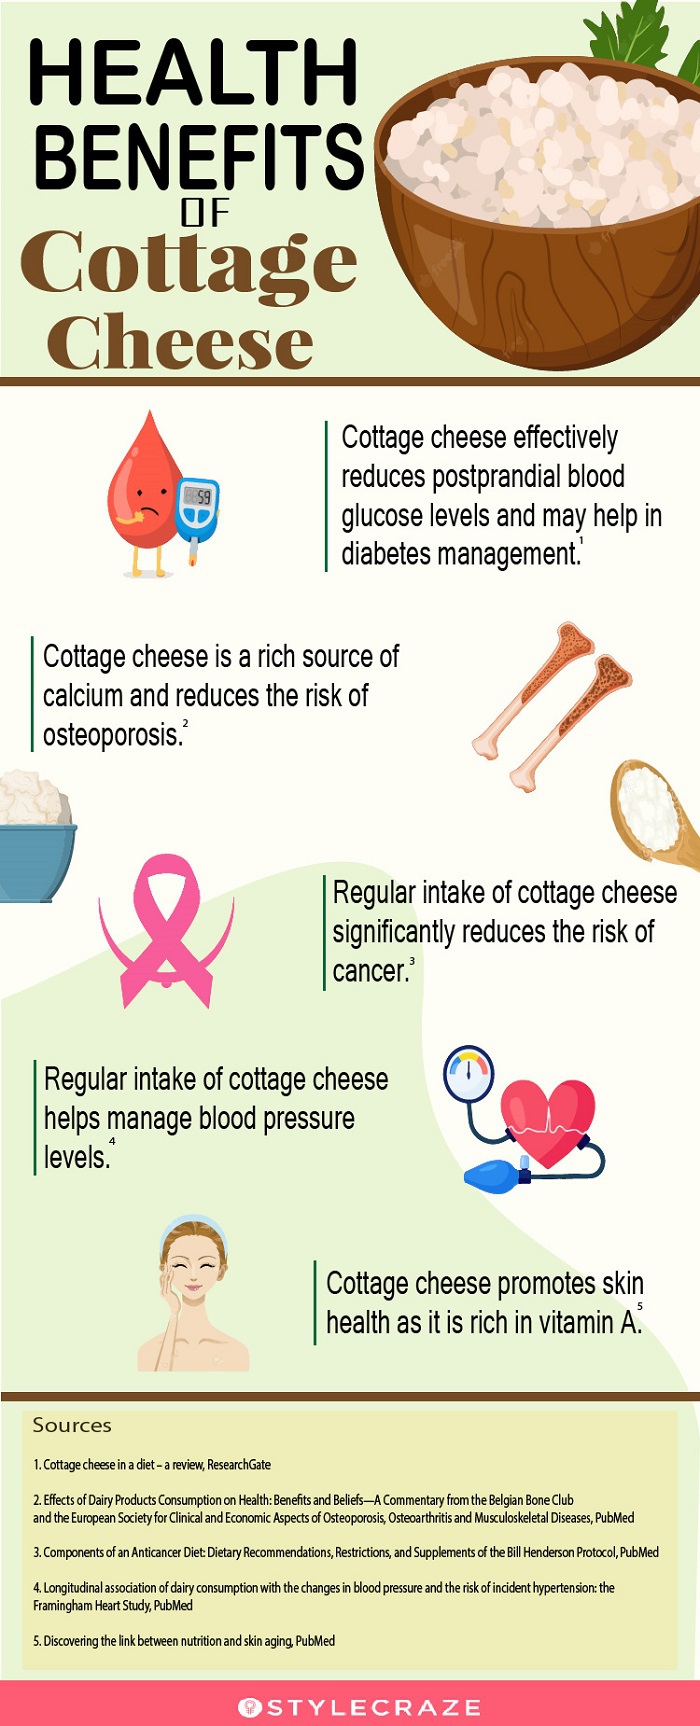 benefits of cottage cheese (infographic)